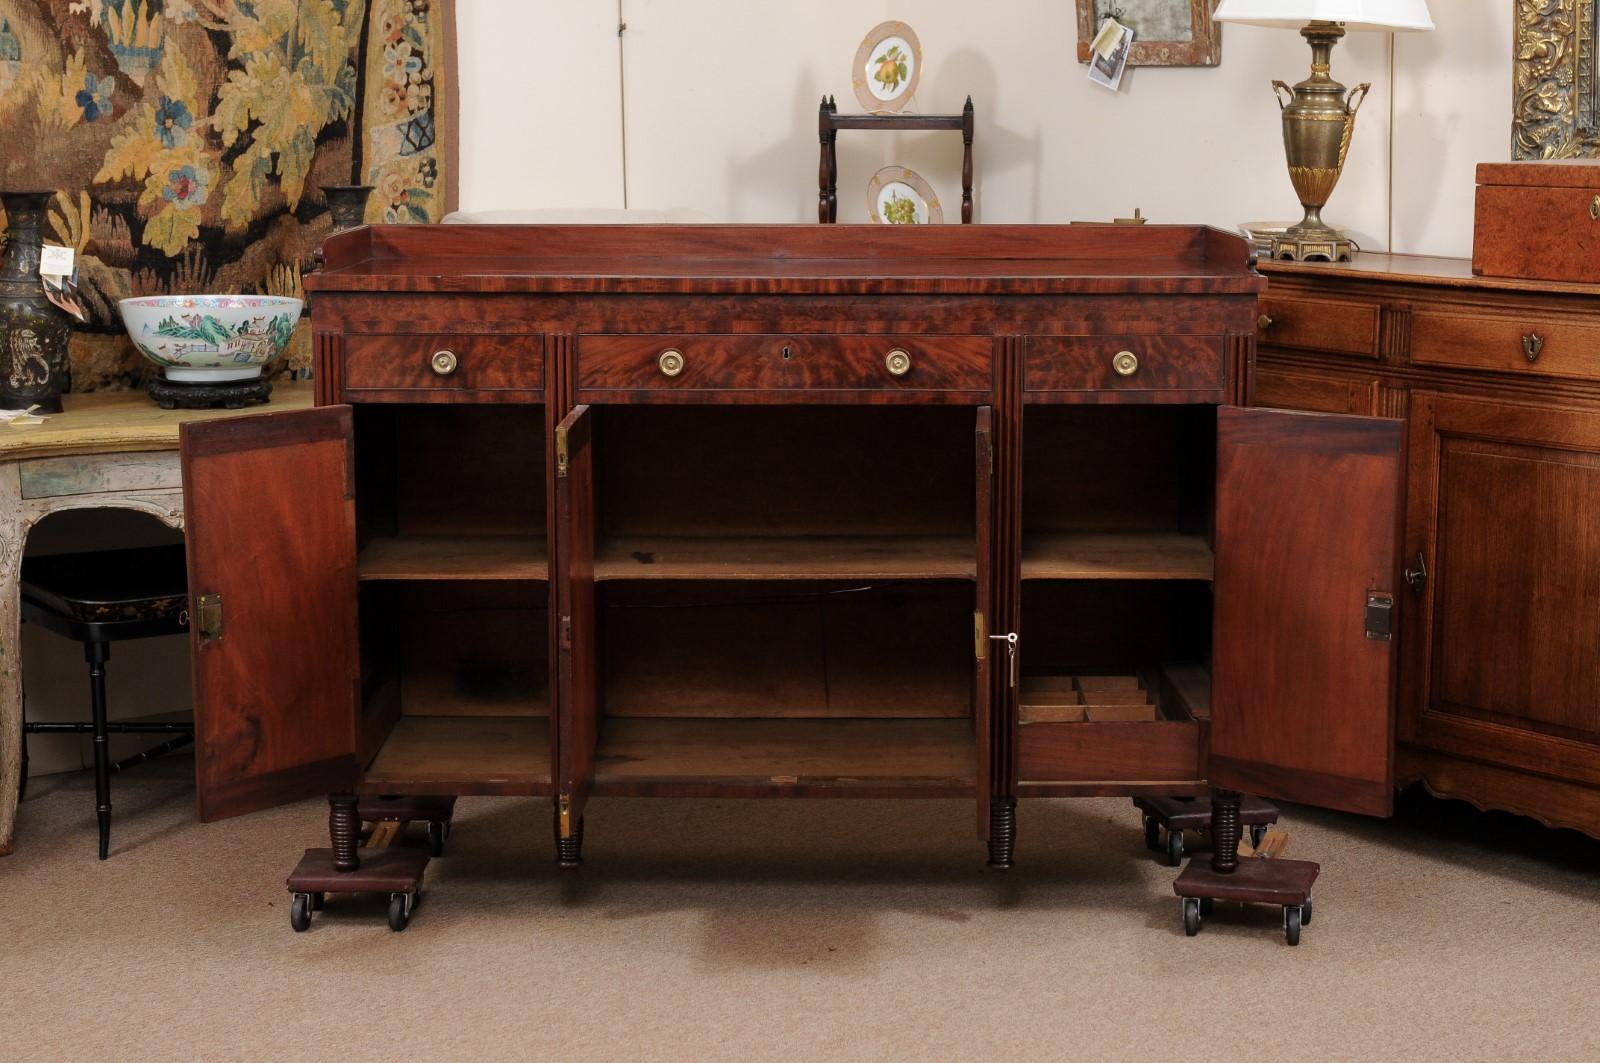 19th Century American Sheraton Sideboard in Mahogany with 4 Cabinet Doors 9